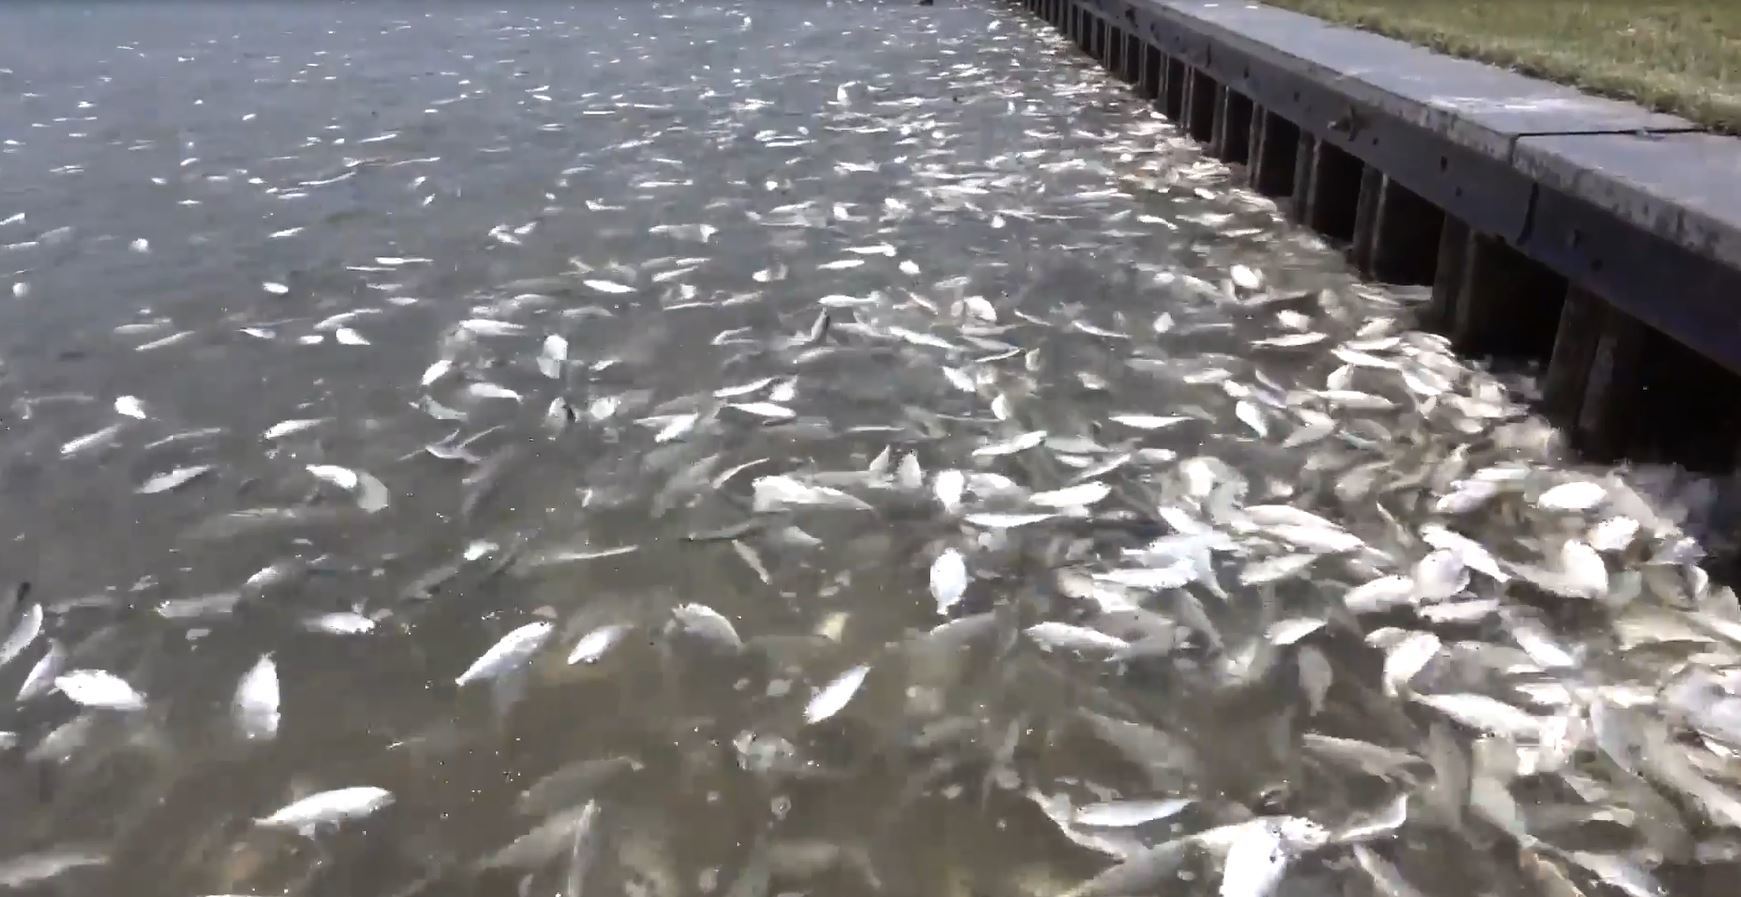 VIDEO Watch thousands of fish wash up on shore in remarkable footage